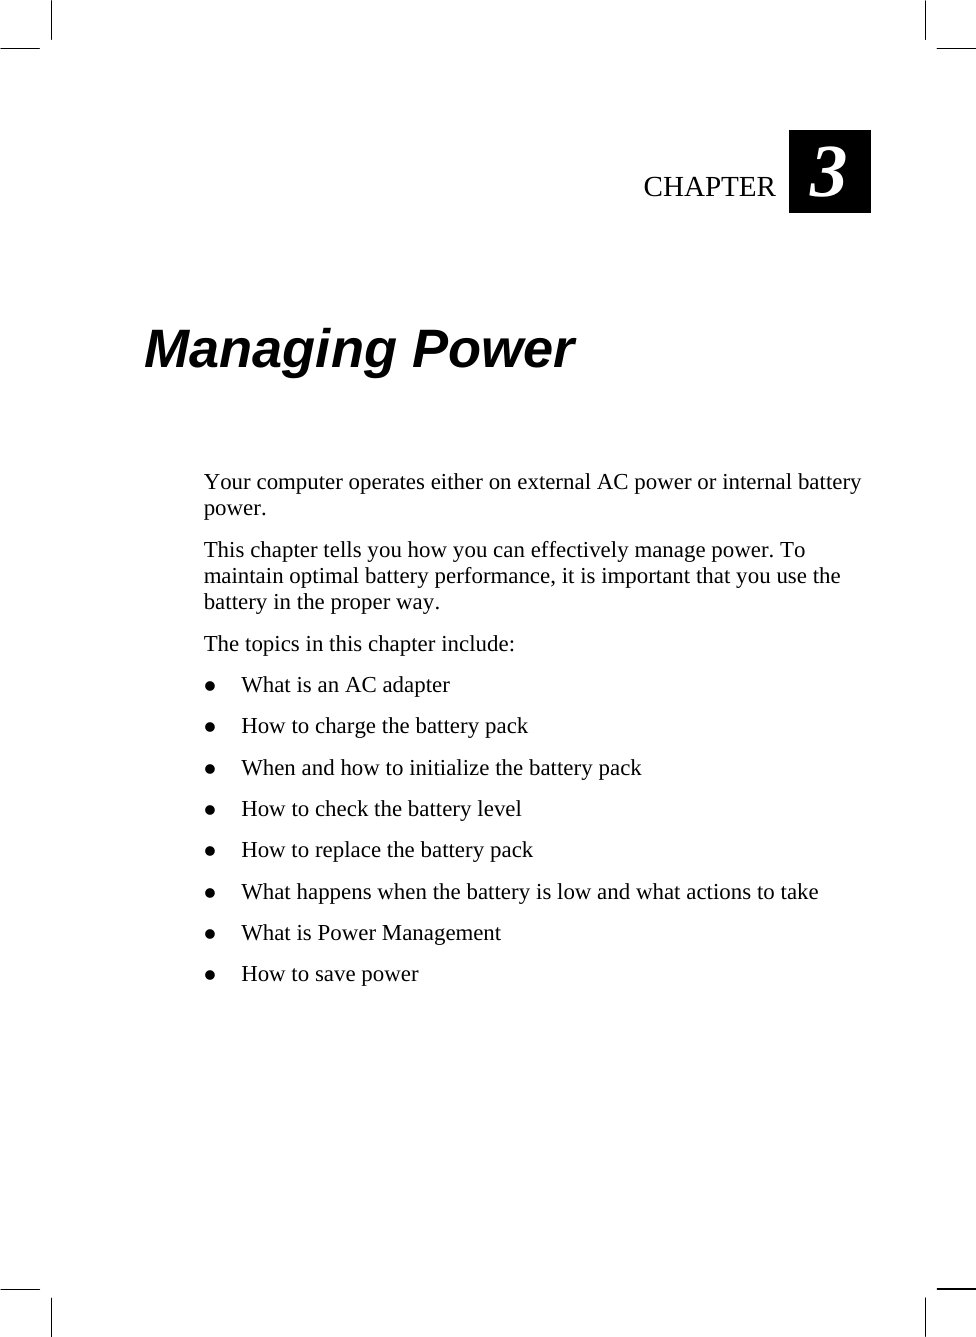   CHAPTER  3 Managing Power Your computer operates either on external AC power or internal battery power. This chapter tells you how you can effectively manage power. To maintain optimal battery performance, it is important that you use the battery in the proper way. The topics in this chapter include:   What is an AC adapter   How to charge the battery pack   When and how to initialize the battery pack   How to check the battery level   How to replace the battery pack   What happens when the battery is low and what actions to take   What is Power Management   How to save power 